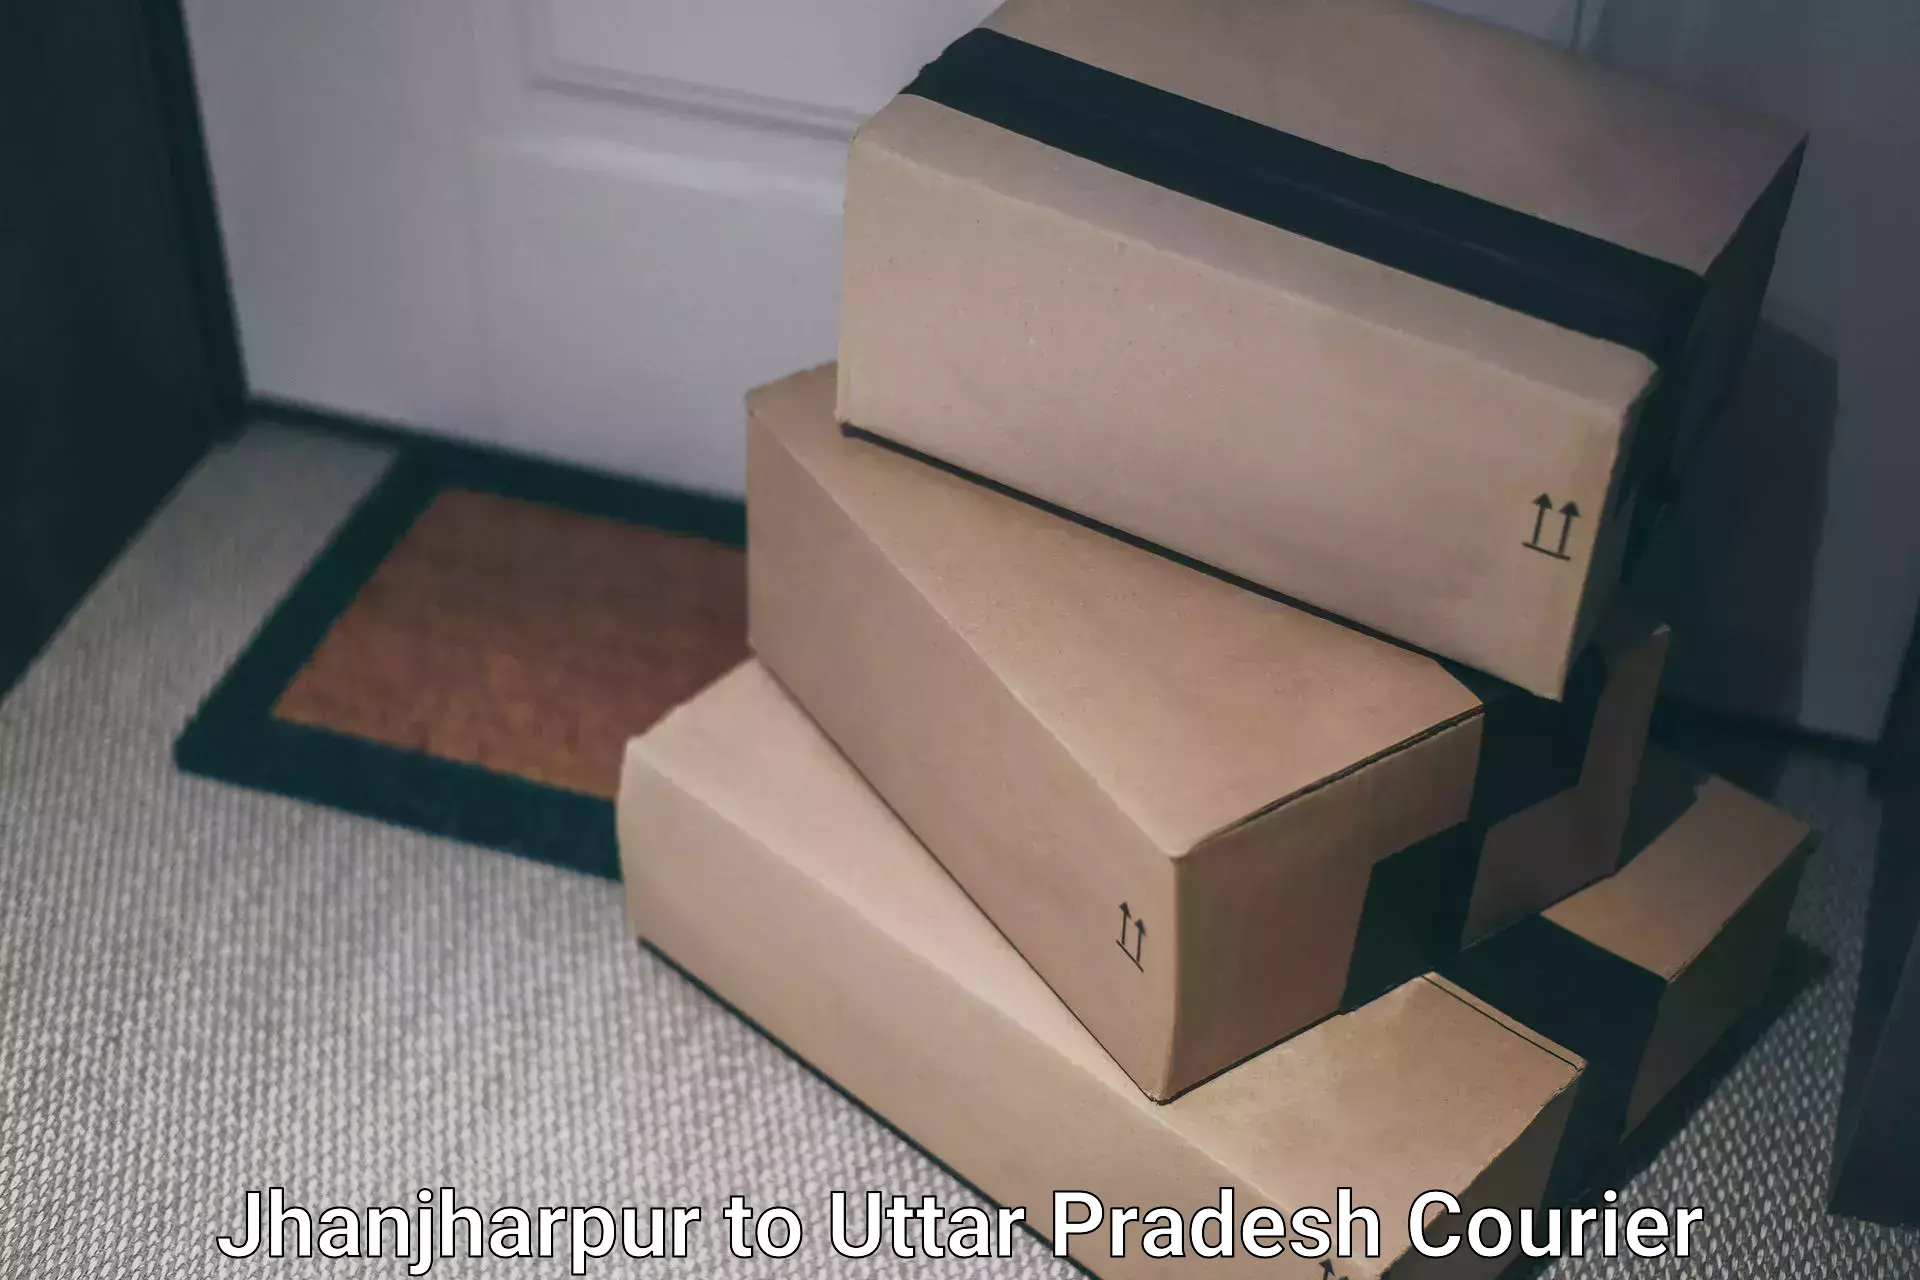 State-of-the-art courier technology Jhanjharpur to Chopan